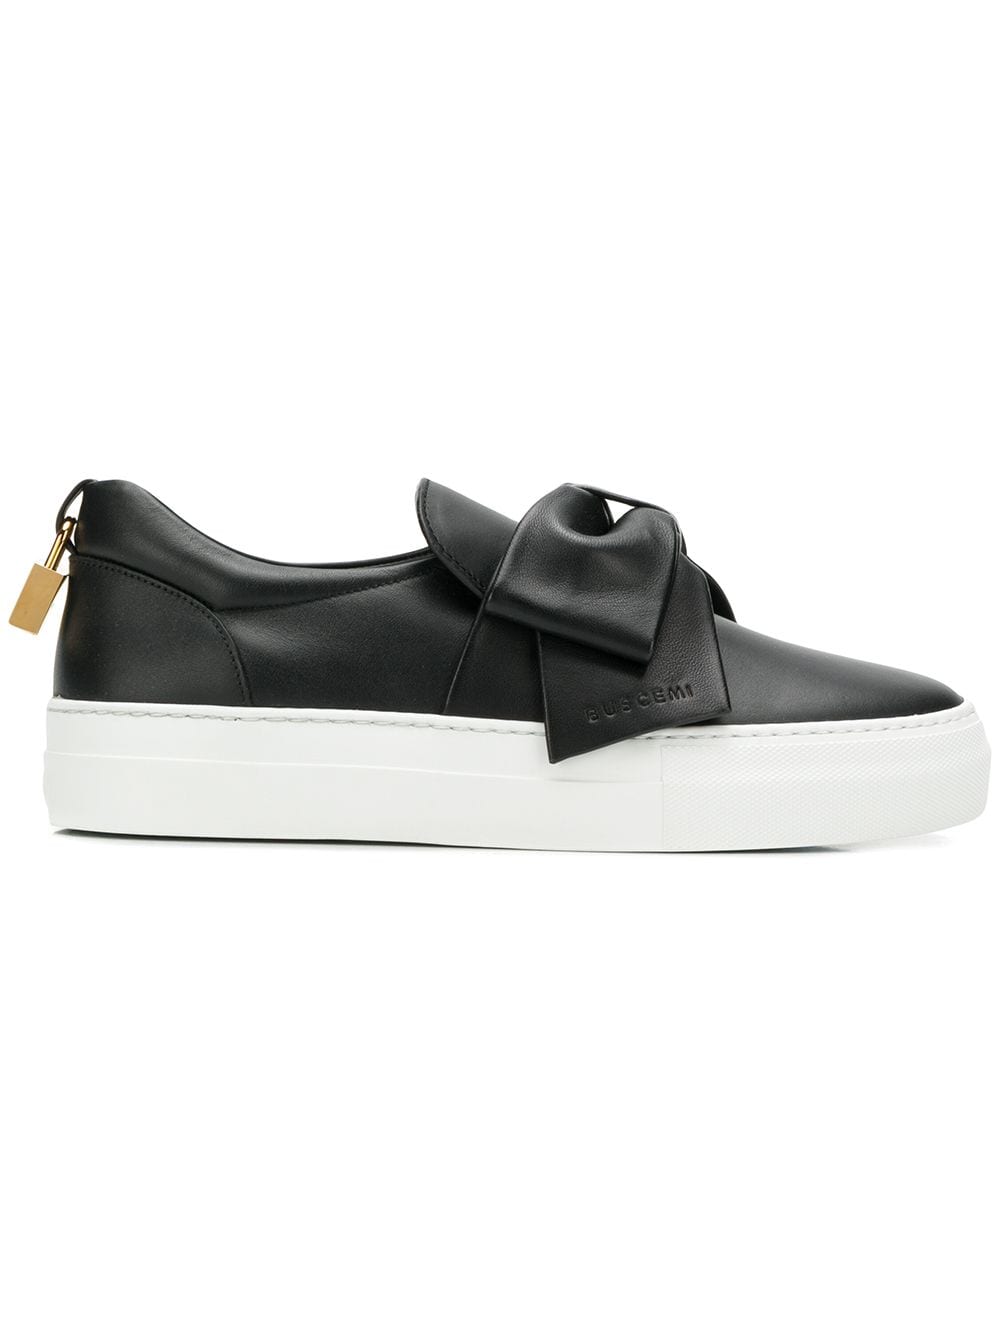 Shop black Buscemi bow sneakers with 